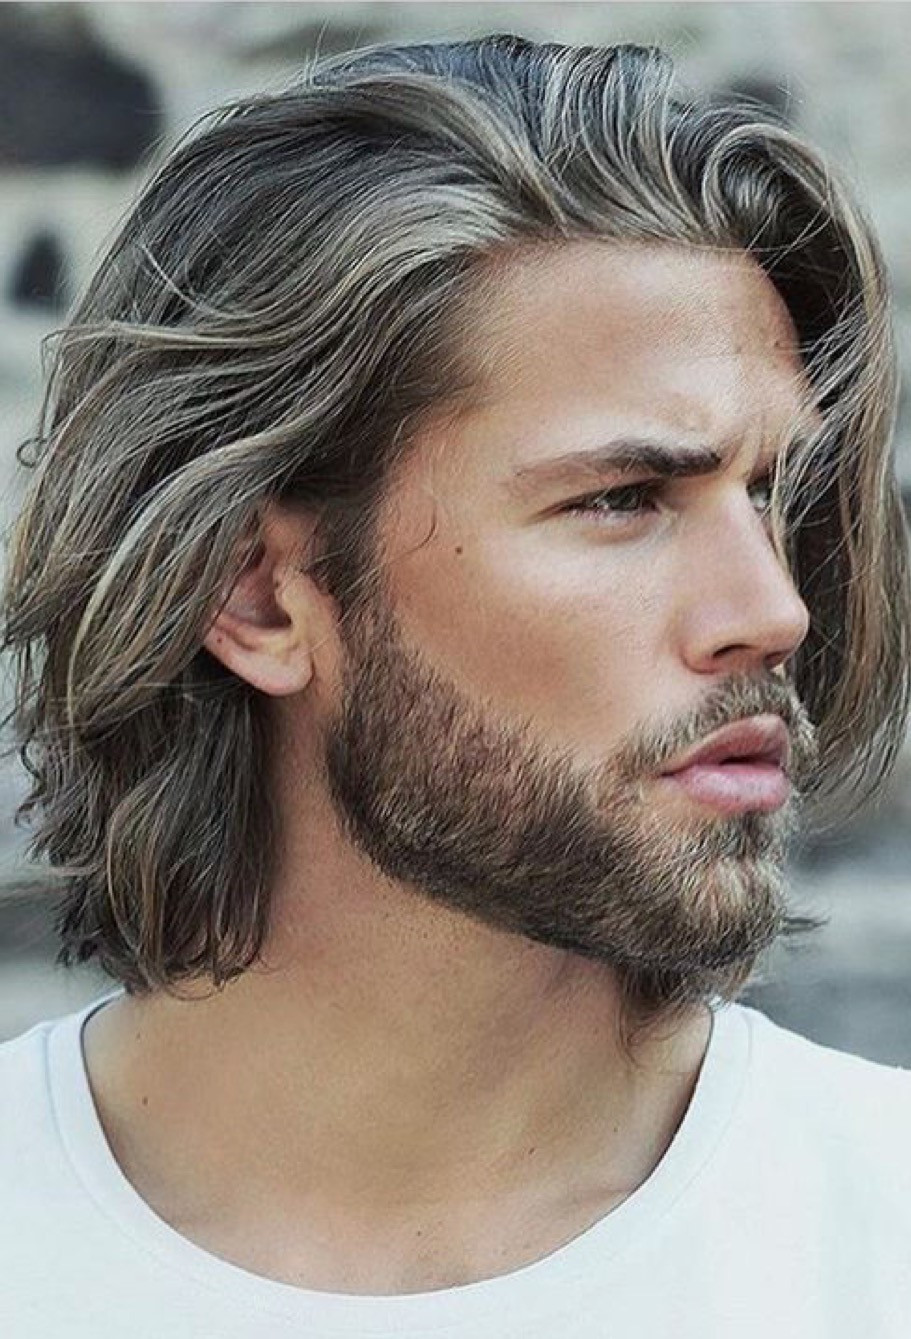 Hairstyles For Men Long
 SAVE THE CLIPPERS FOR THE BEARD MENS HAIR GOES LONGER